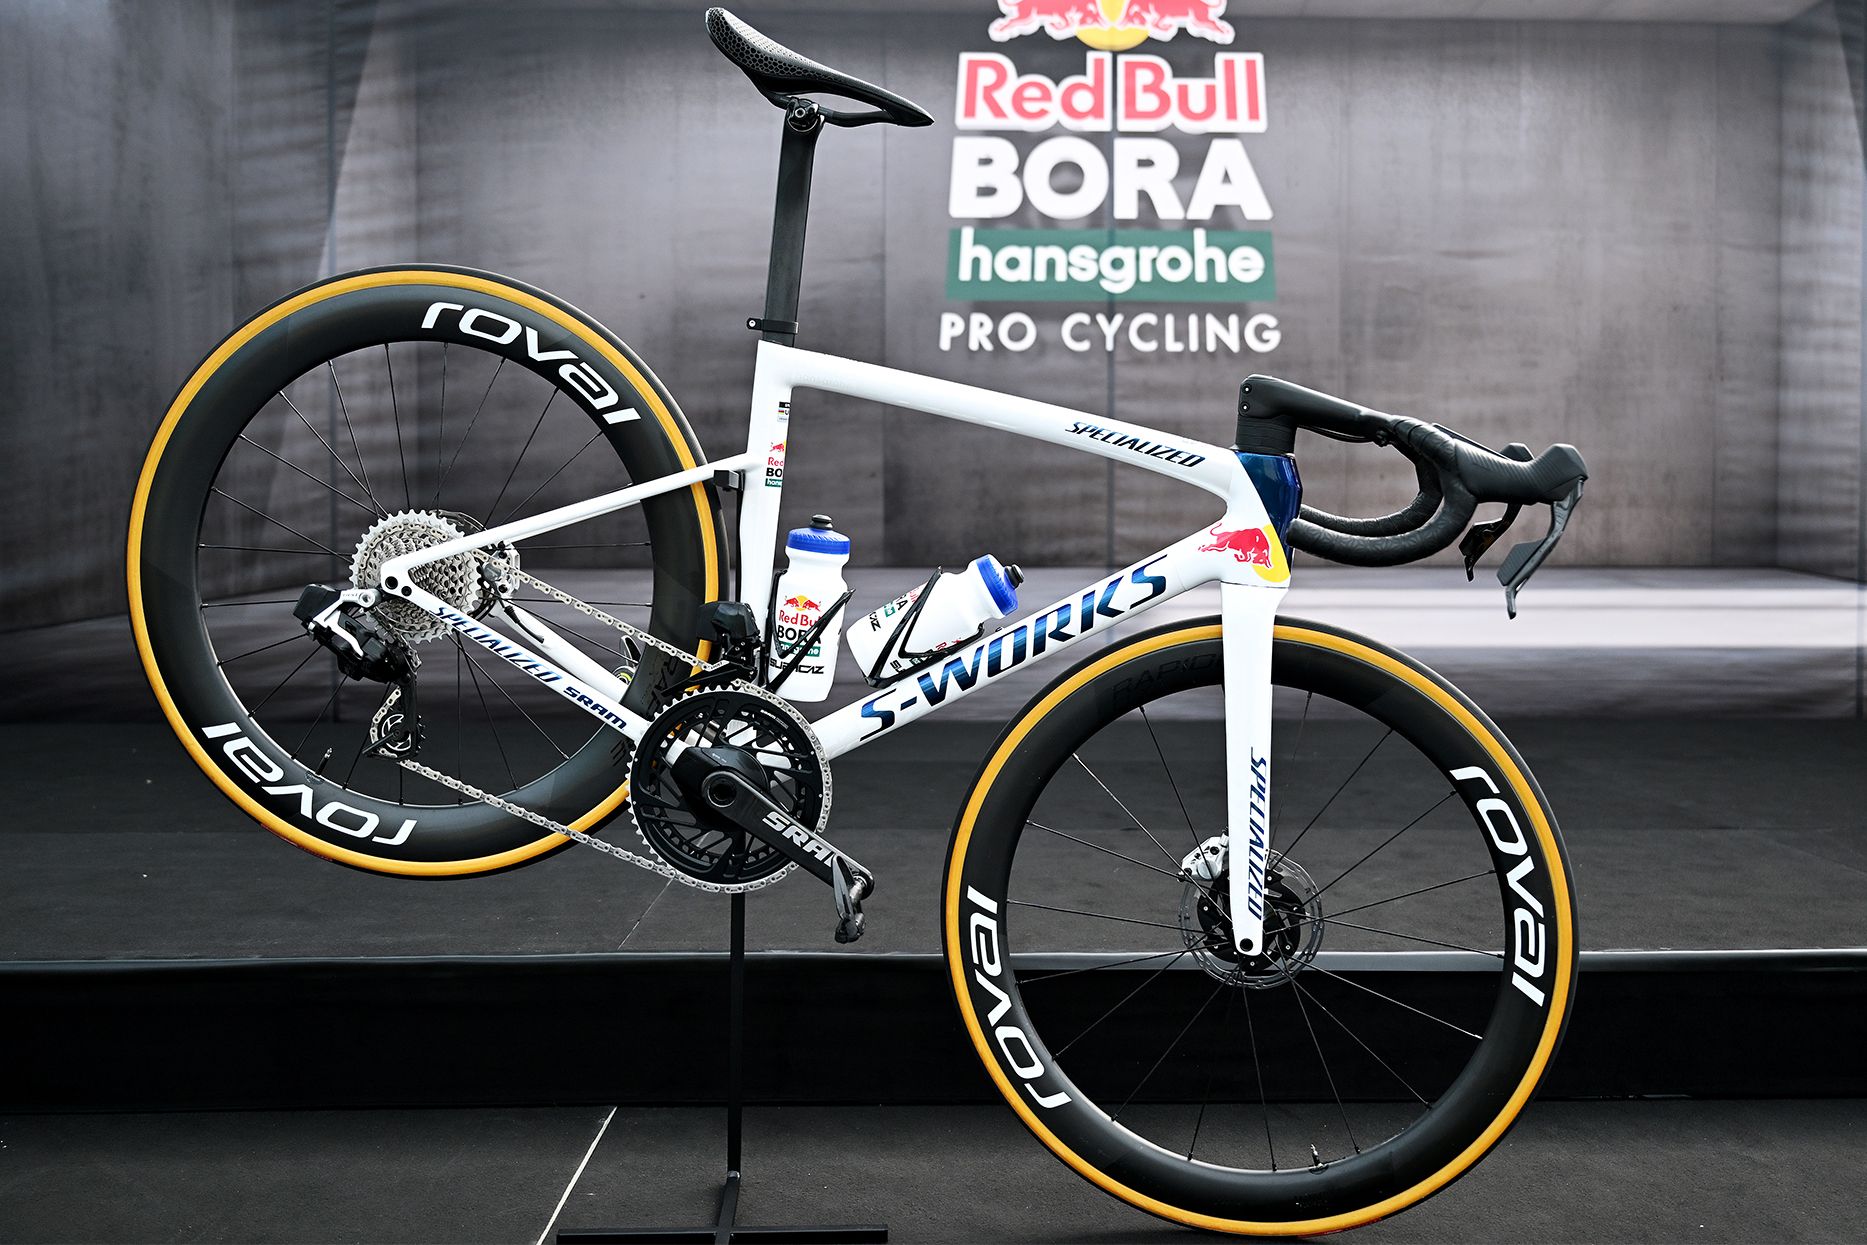 salzburg, austria june 26 specialized bike during the official launch team red bull bora hansgrohe in red bull hangar 7 on june 26, 2024 in salzburg, austria photo by tim de waelegetty images